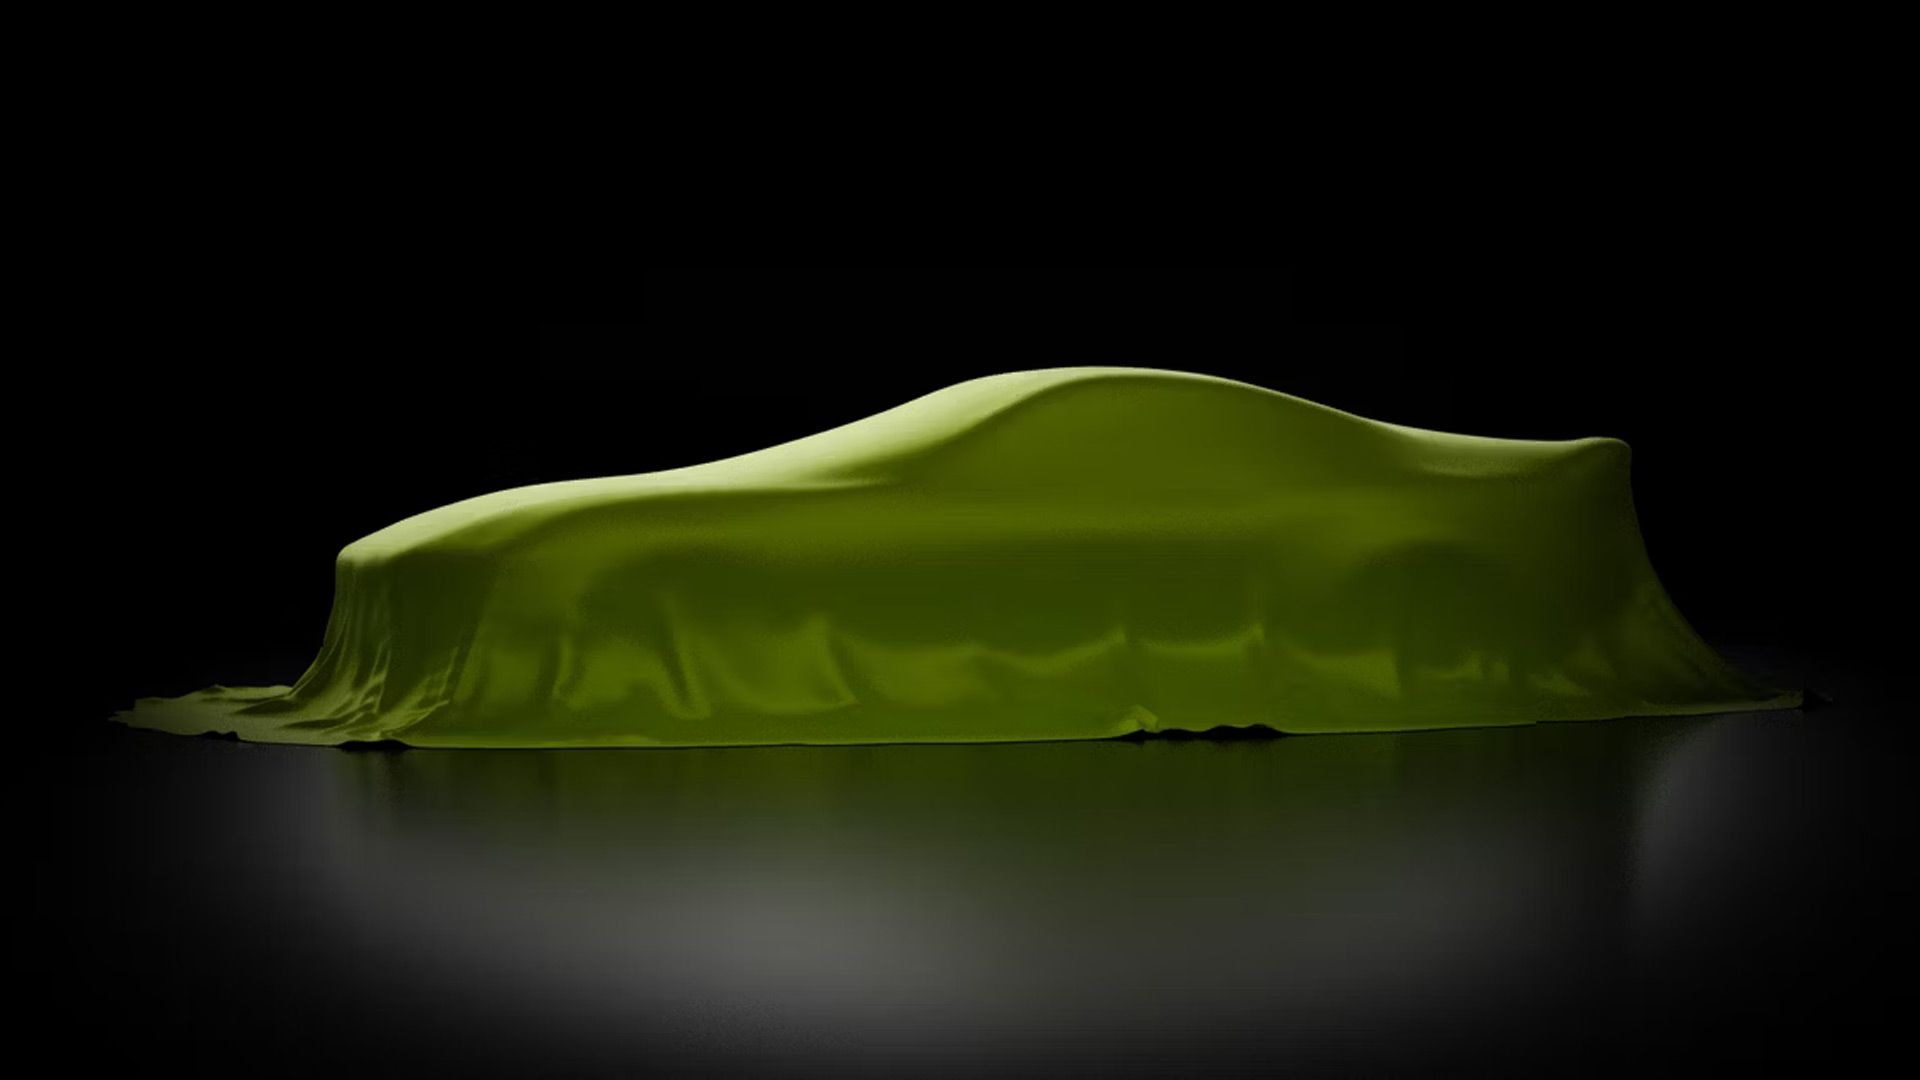 Teaser for new Ford Mustang variant debuting in 2025